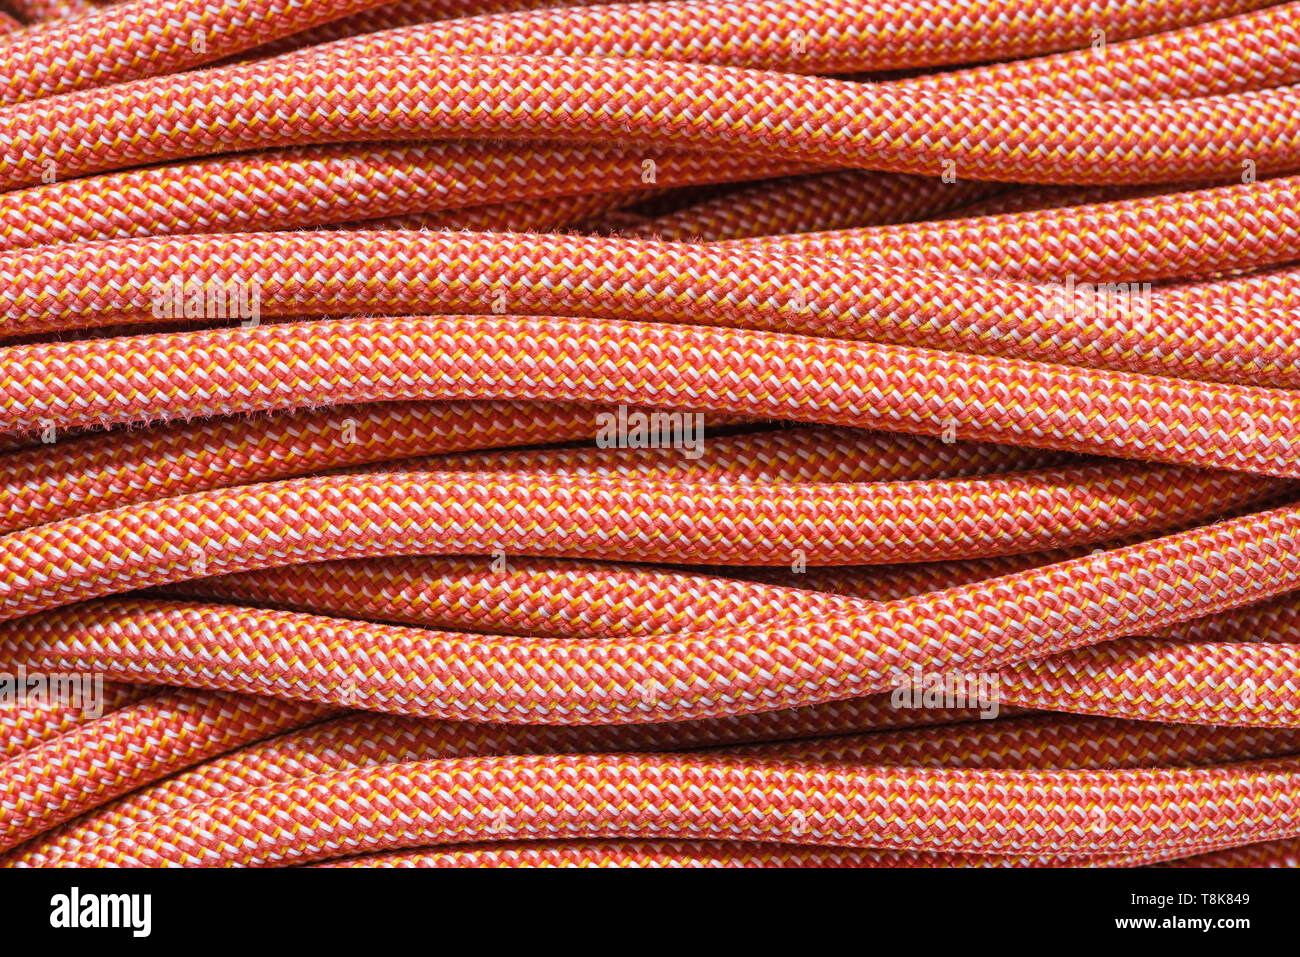 background of strands of coiled orange climbing rope Stock Photo